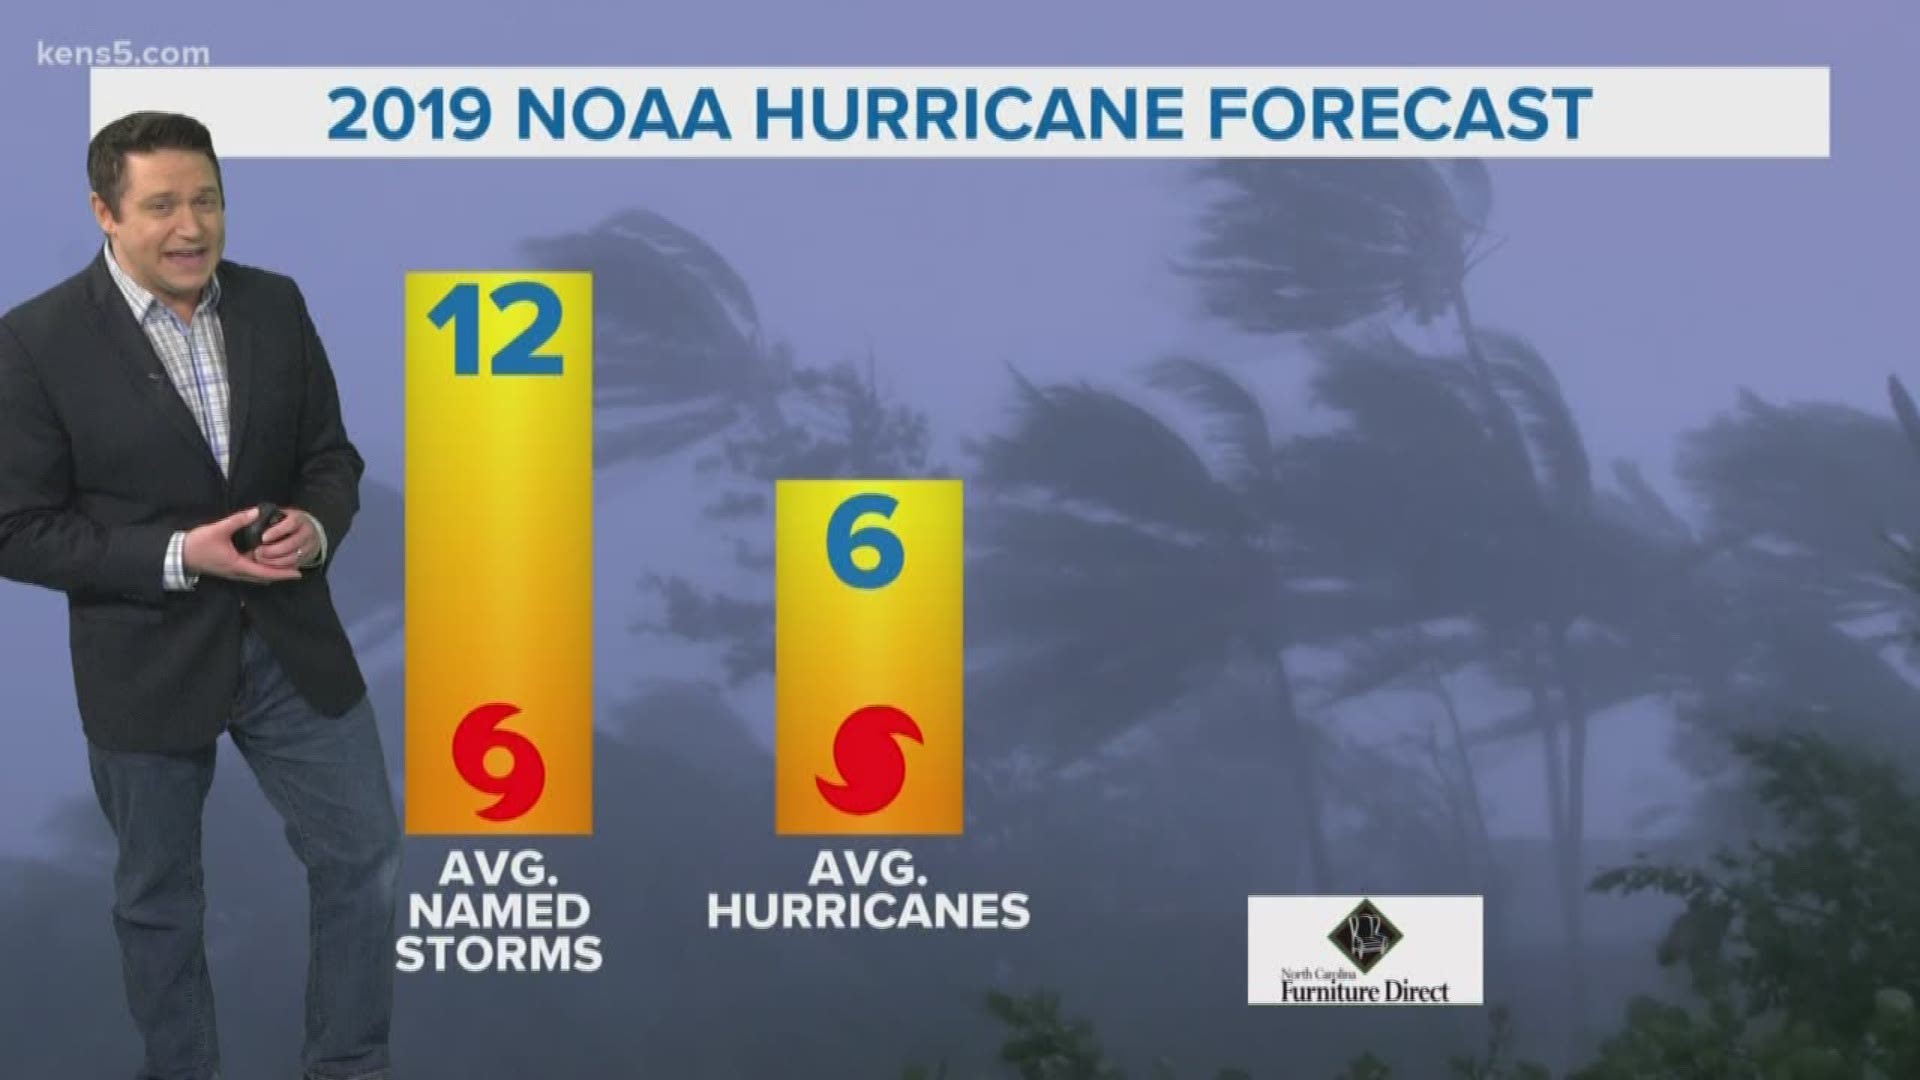 We've already begun going down the annual list of alphabetical names assigned to this year's hurricanes. Here's how many are forecasted by the experts.